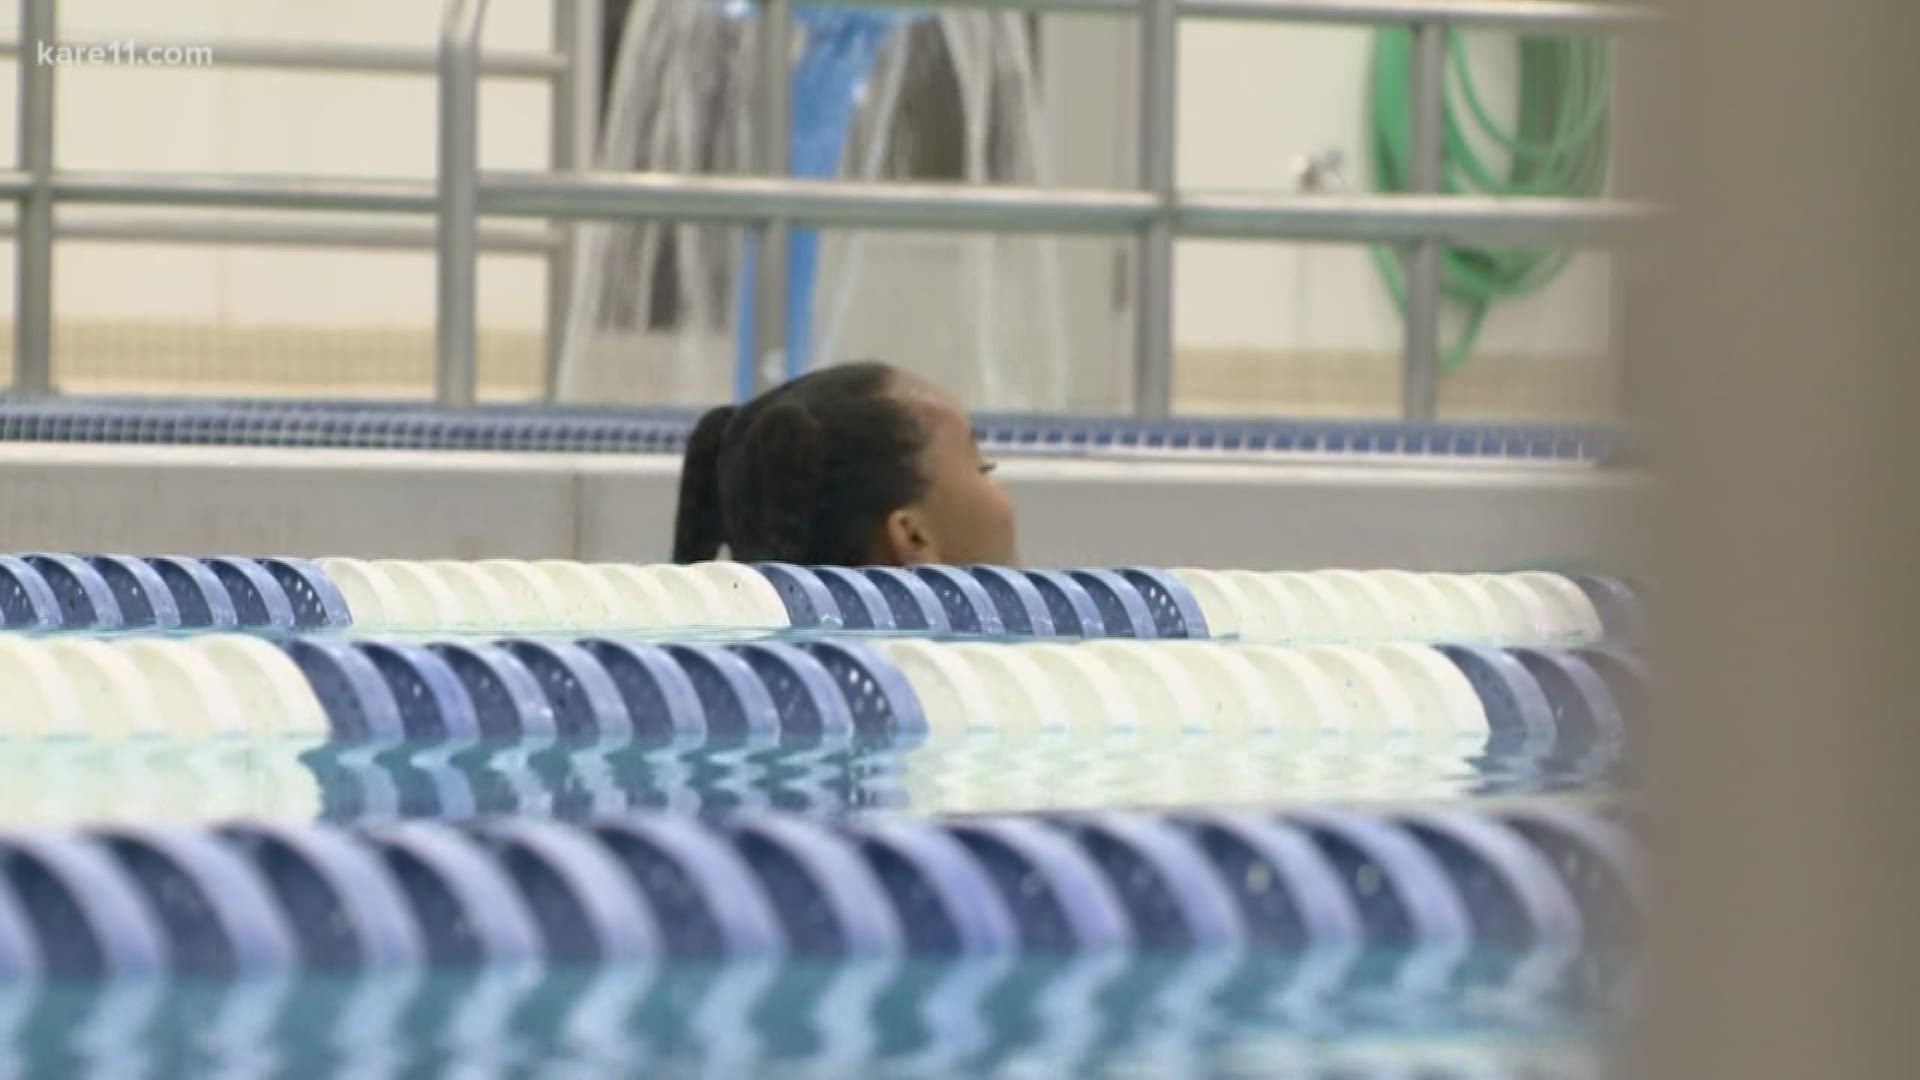 KARE 11's Kiya Edwards stopped by the YMCA in St. Paul to learn some tips for parents to keep children safe while swimming this summer. https://kare11.tv/2lPSiK8